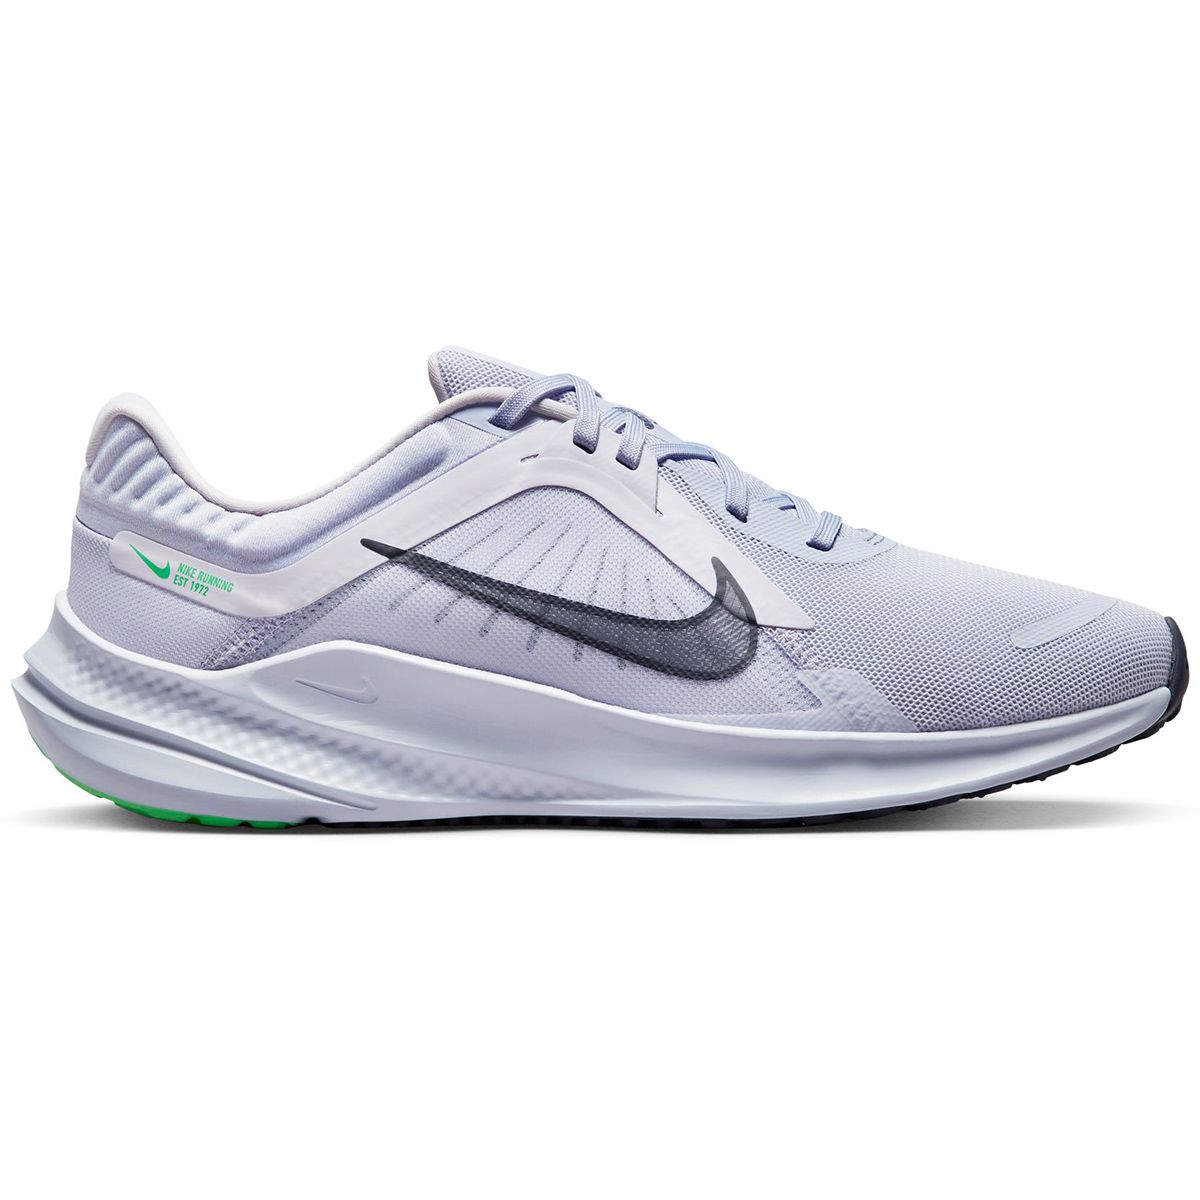 Nike Quest 5 Men's Road Running Shoes DD0204-500